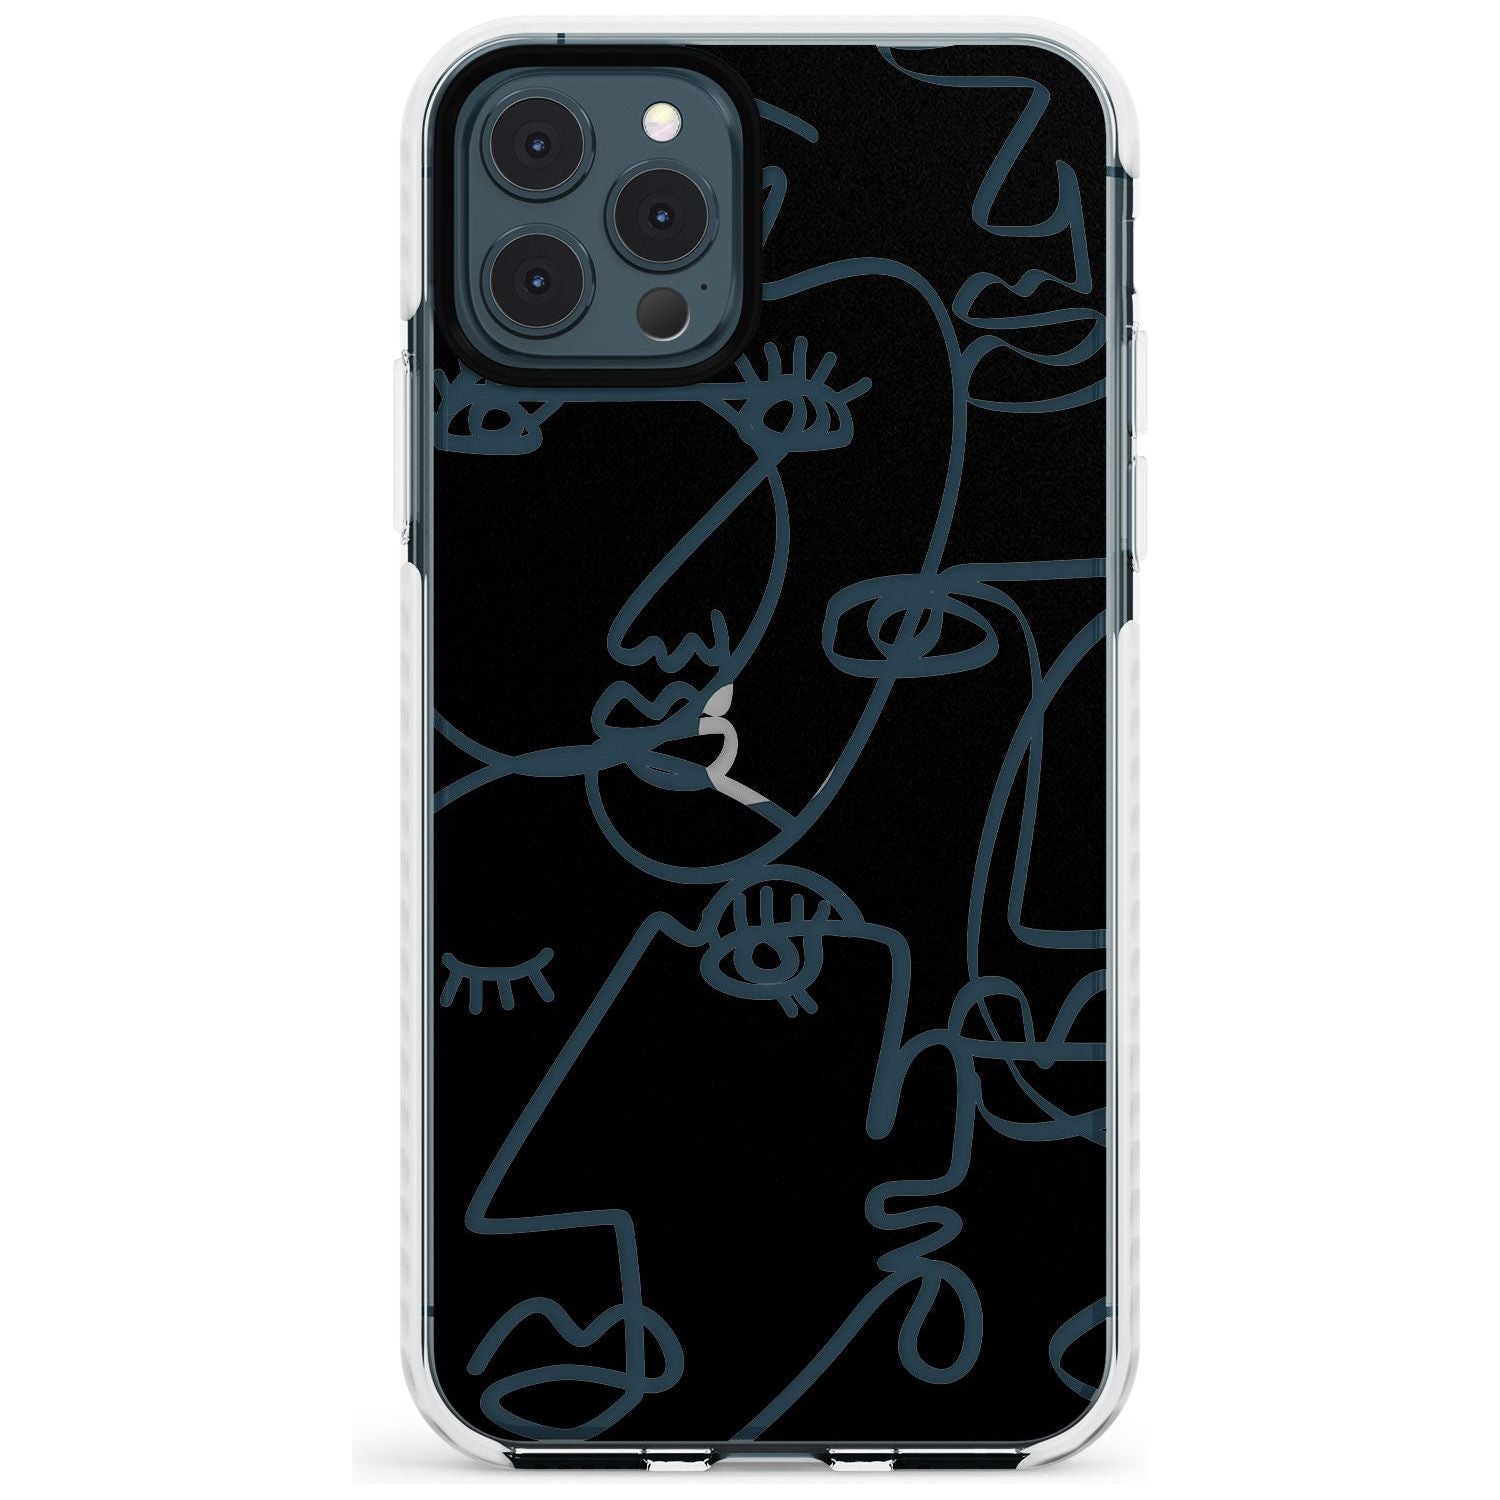 Continuous Line Faces: Clear on Black Slim TPU Phone Case for iPhone 11 Pro Max